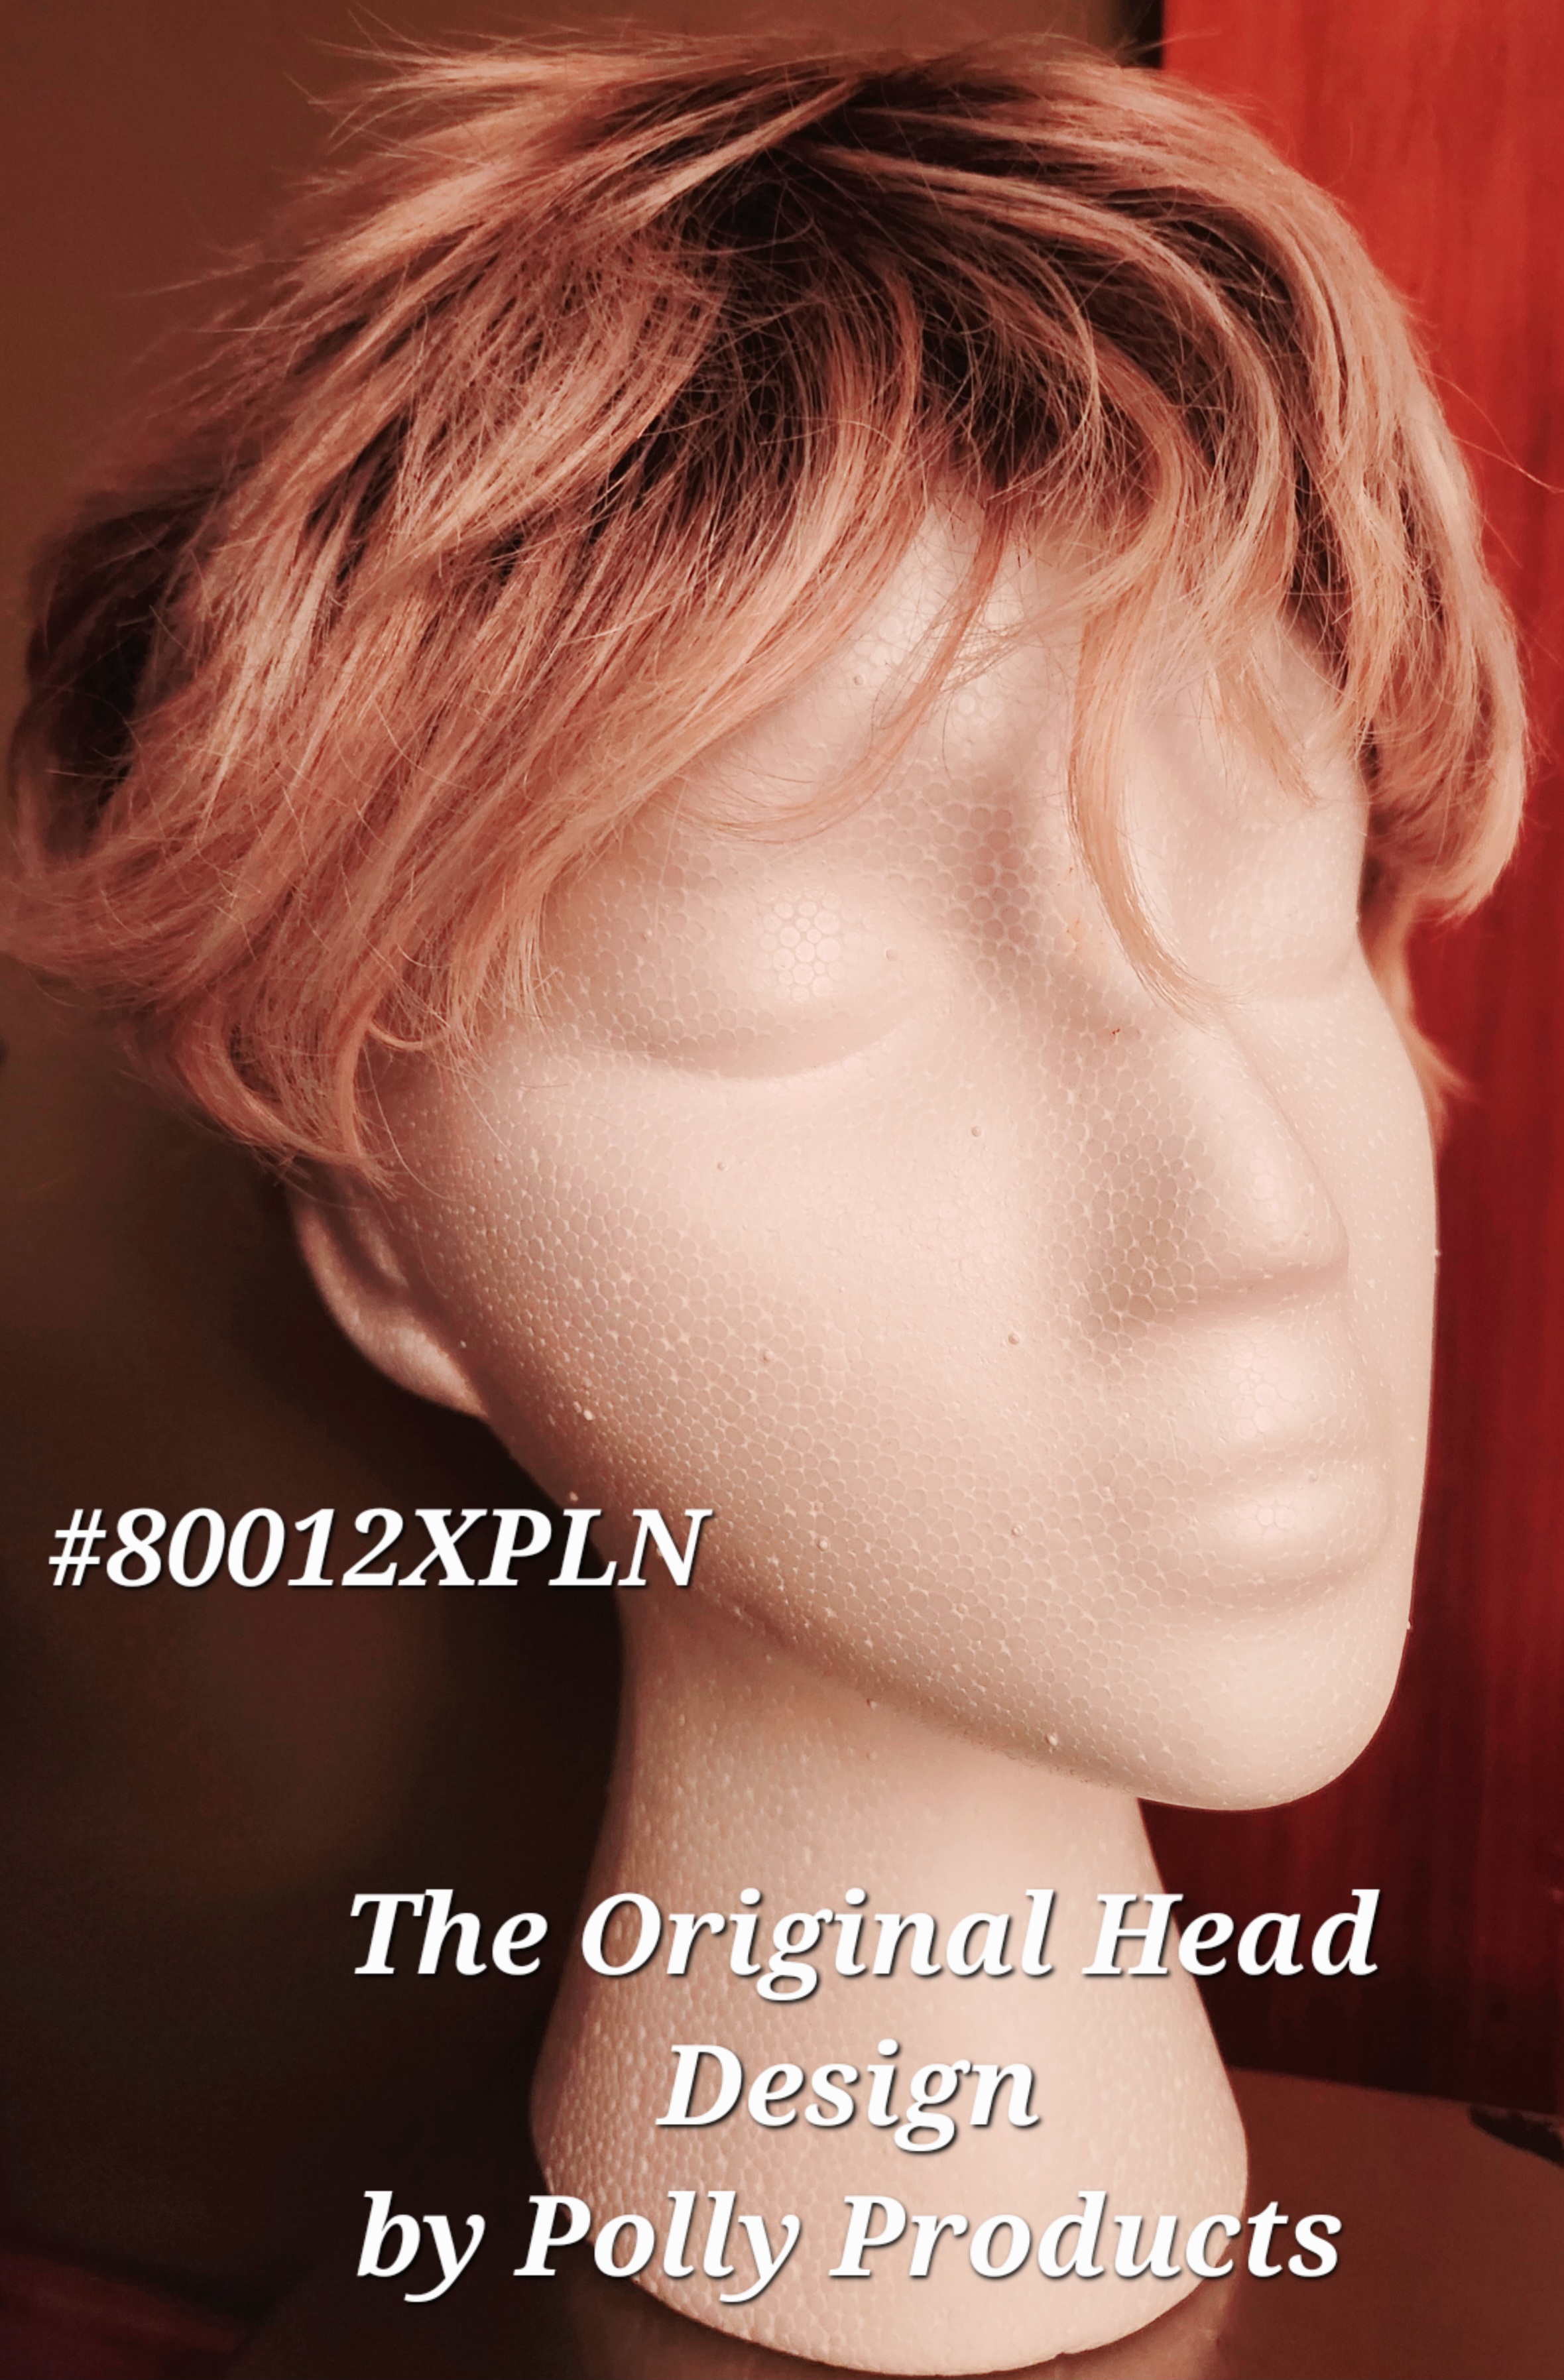 #80012XPLN POLLY PRODUCTS ORIGINAL DESIGN Female Head form. 11"H, WITH EARS.